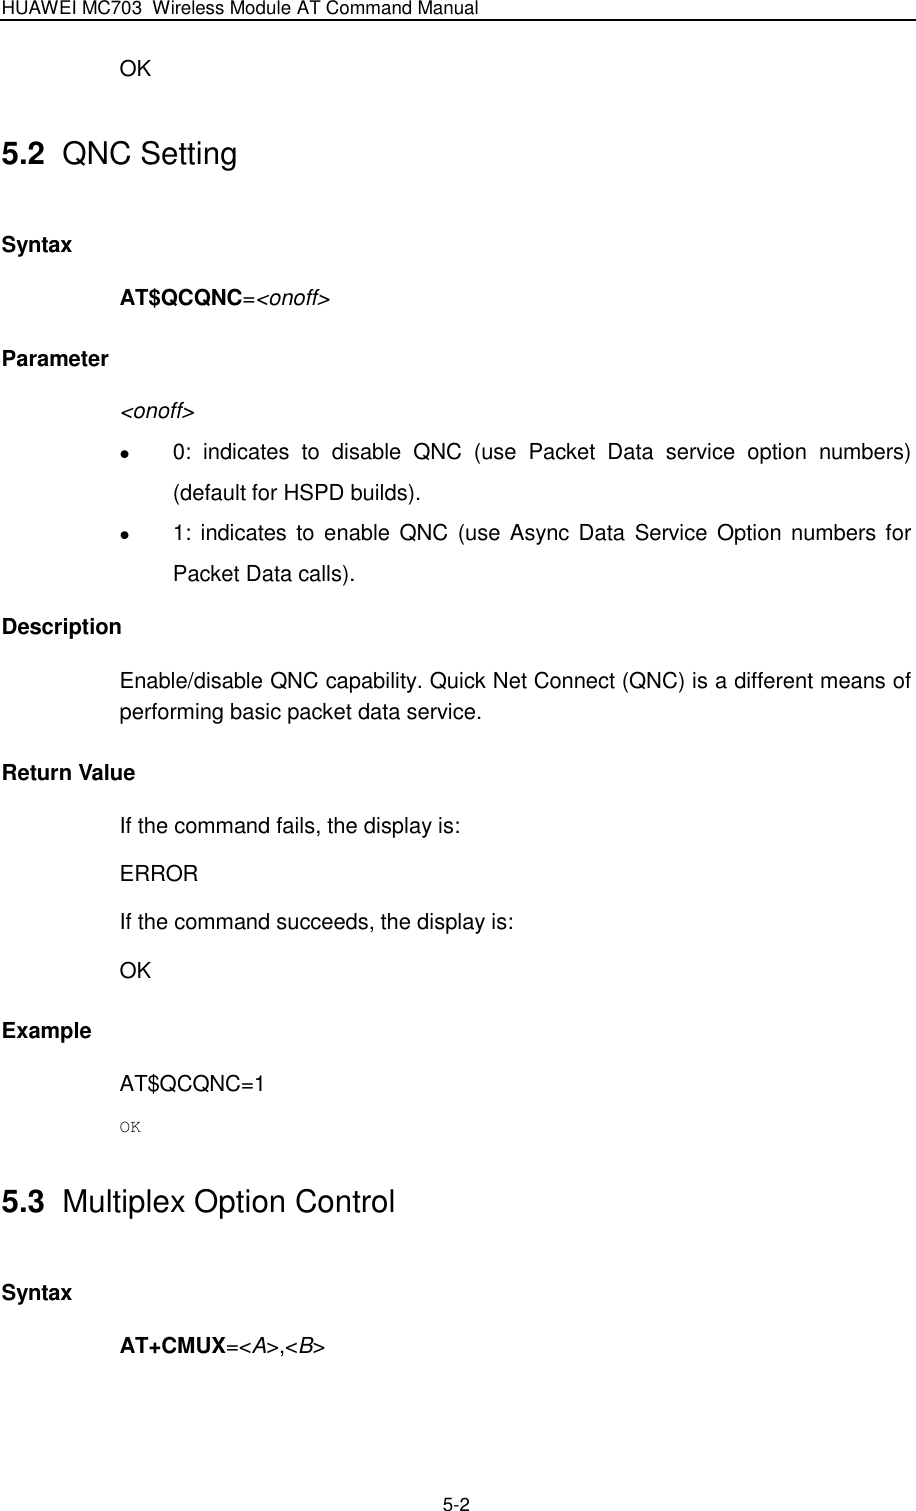 HUAWEI MC703 Wireless Module AT Command Manual   5-2 OK 5.2  QNC Setting Syntax AT$QCQNC=&lt;onoff&gt; Parameter &lt;onoff&gt;  0:  indicates  to  disable  QNC  (use  Packet  Data  service  option  numbers) (default for HSPD builds).  1: indicates to enable QNC  (use Async Data  Service Option numbers for Packet Data calls). Description Enable/disable QNC capability. Quick Net Connect (QNC) is a different means of performing basic packet data service. Return Value If the command fails, the display is: ERROR If the command succeeds, the display is: OK Example AT$QCQNC=1 OK 5.3  Multiplex Option Control Syntax AT+CMUX=&lt;A&gt;,&lt;B&gt; 